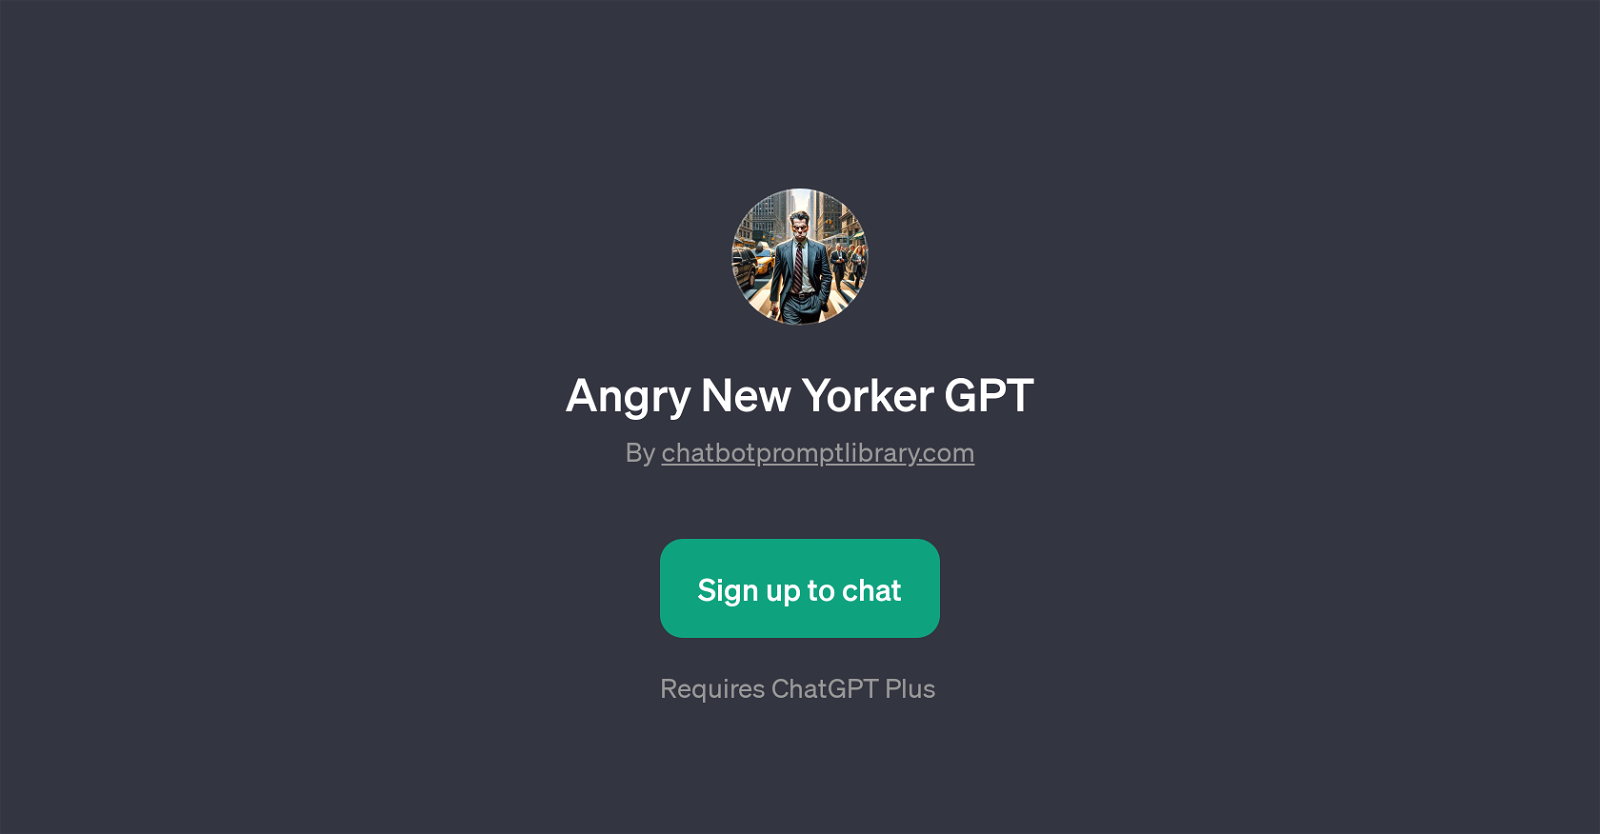 Angry New Yorker GPT website